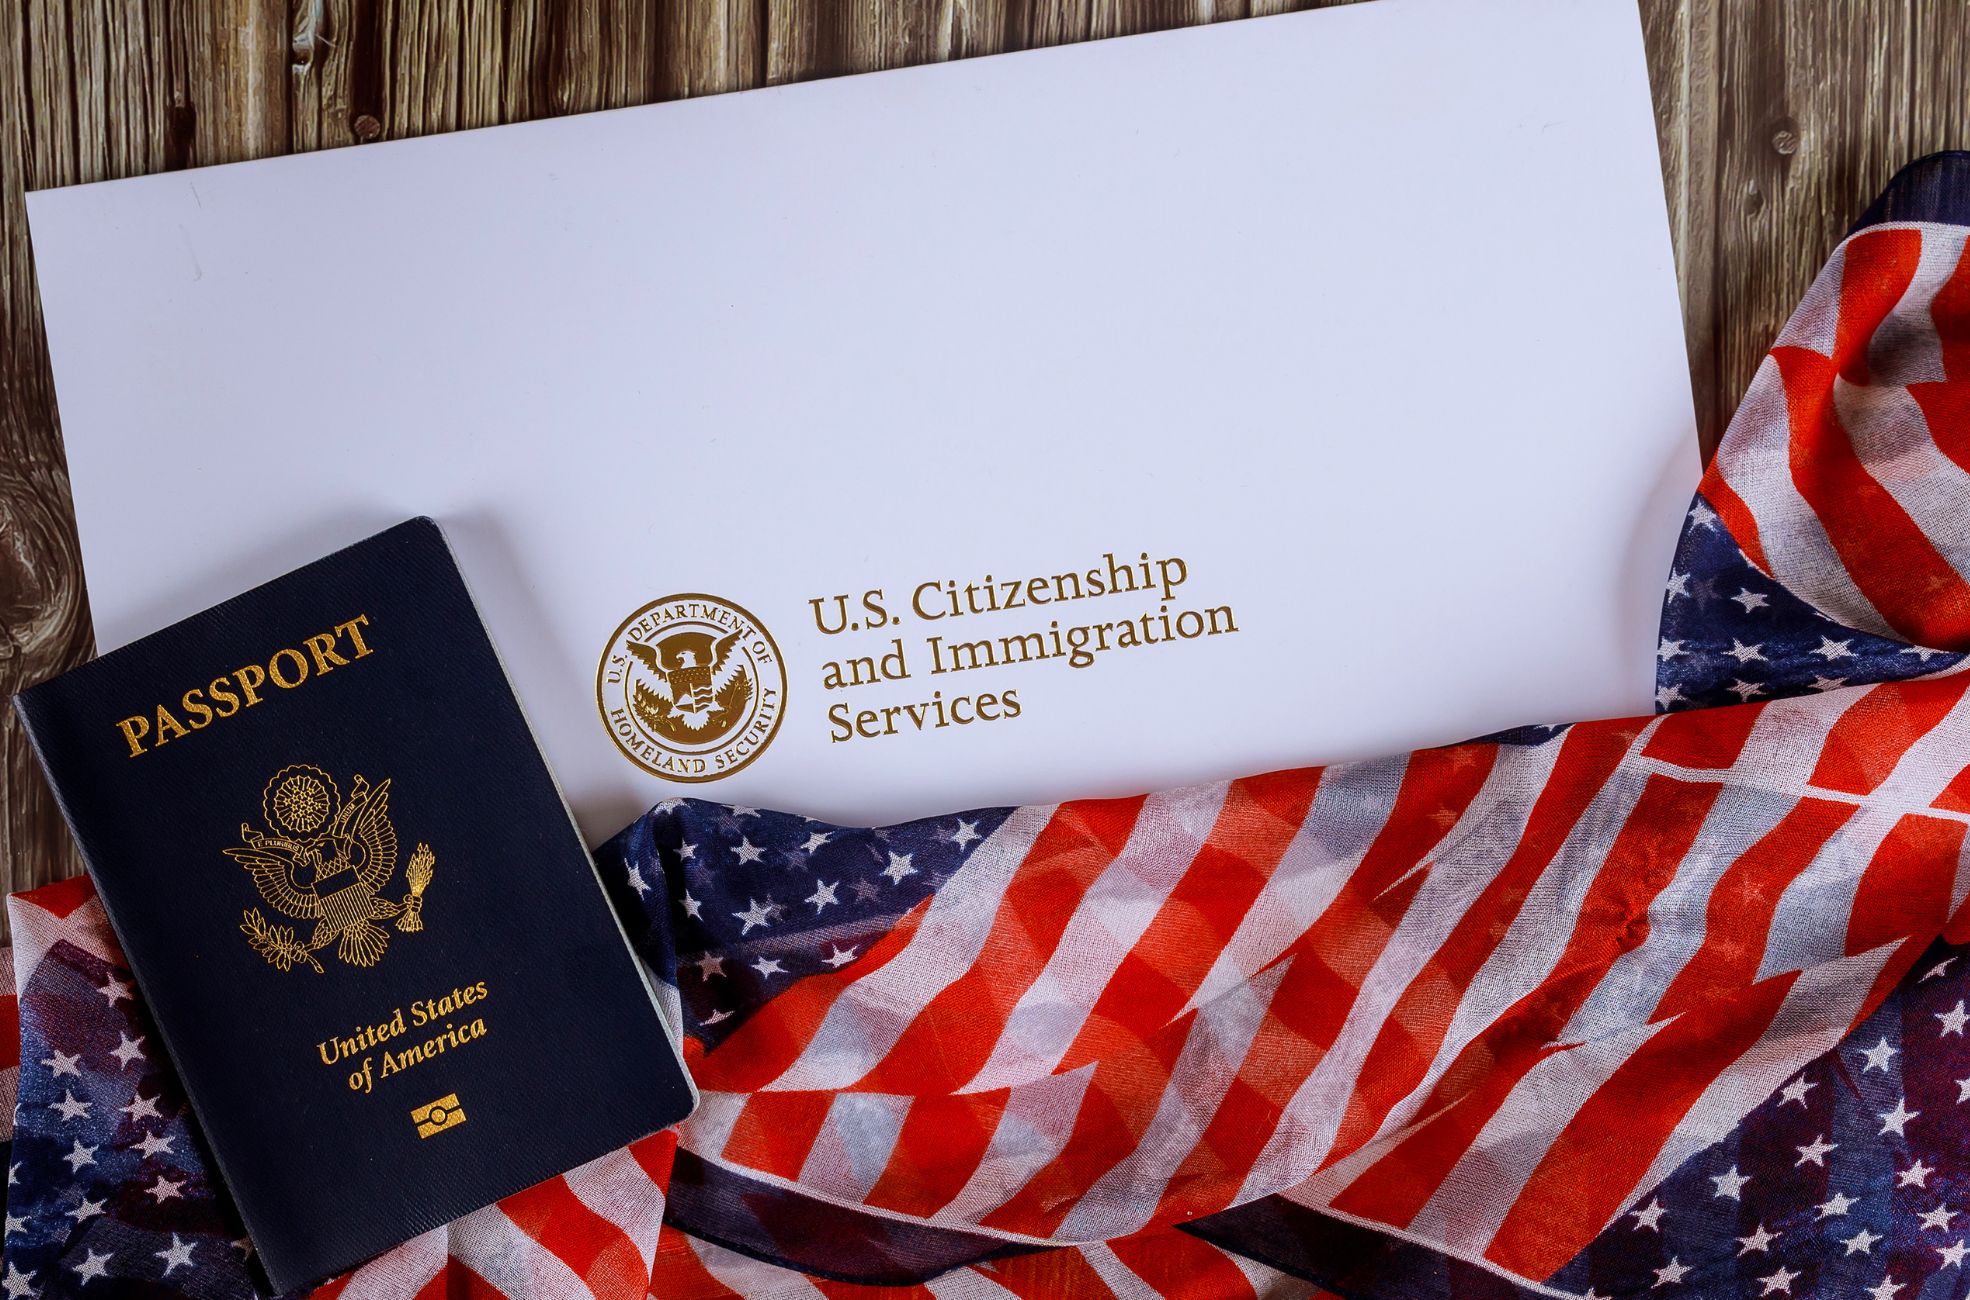 Stock Photo Showing US Flag And Passport